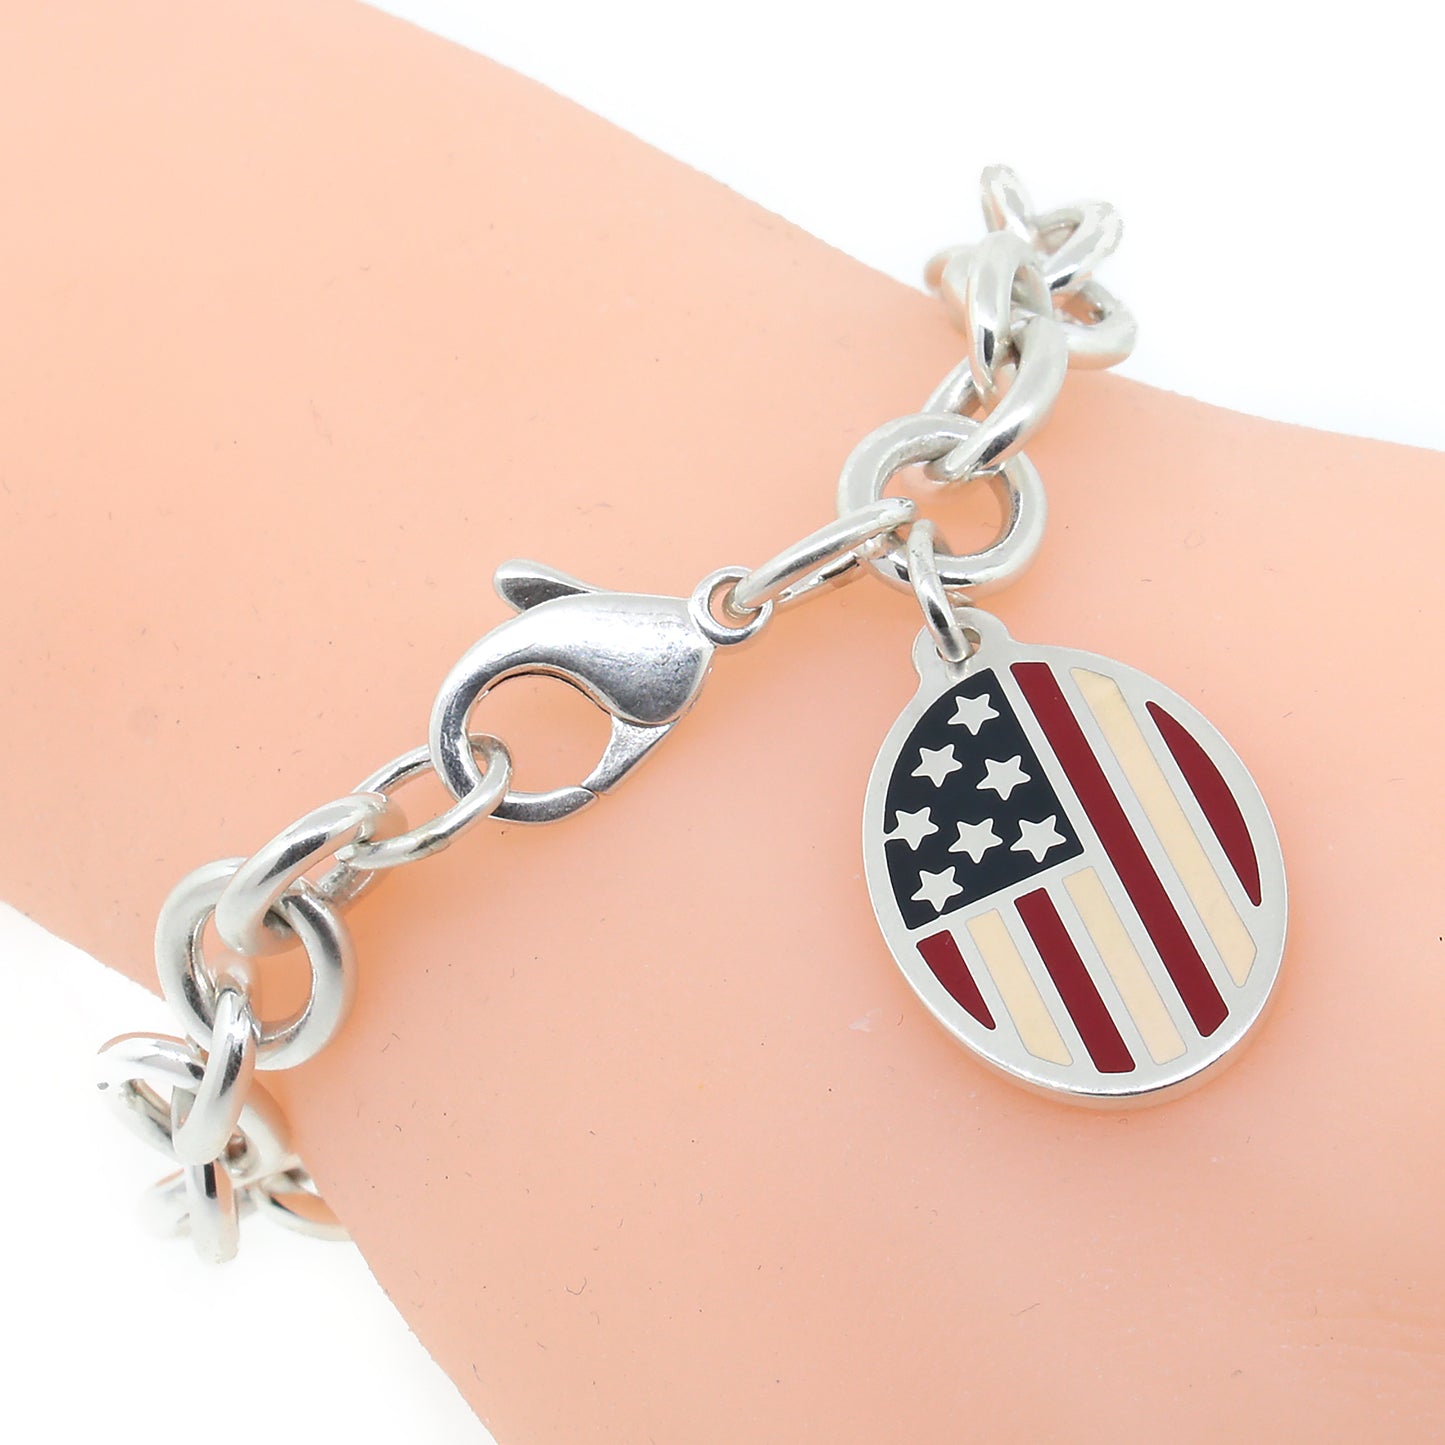 Tiffany and Co. American Flag Sterling Silver Charm Bracelet